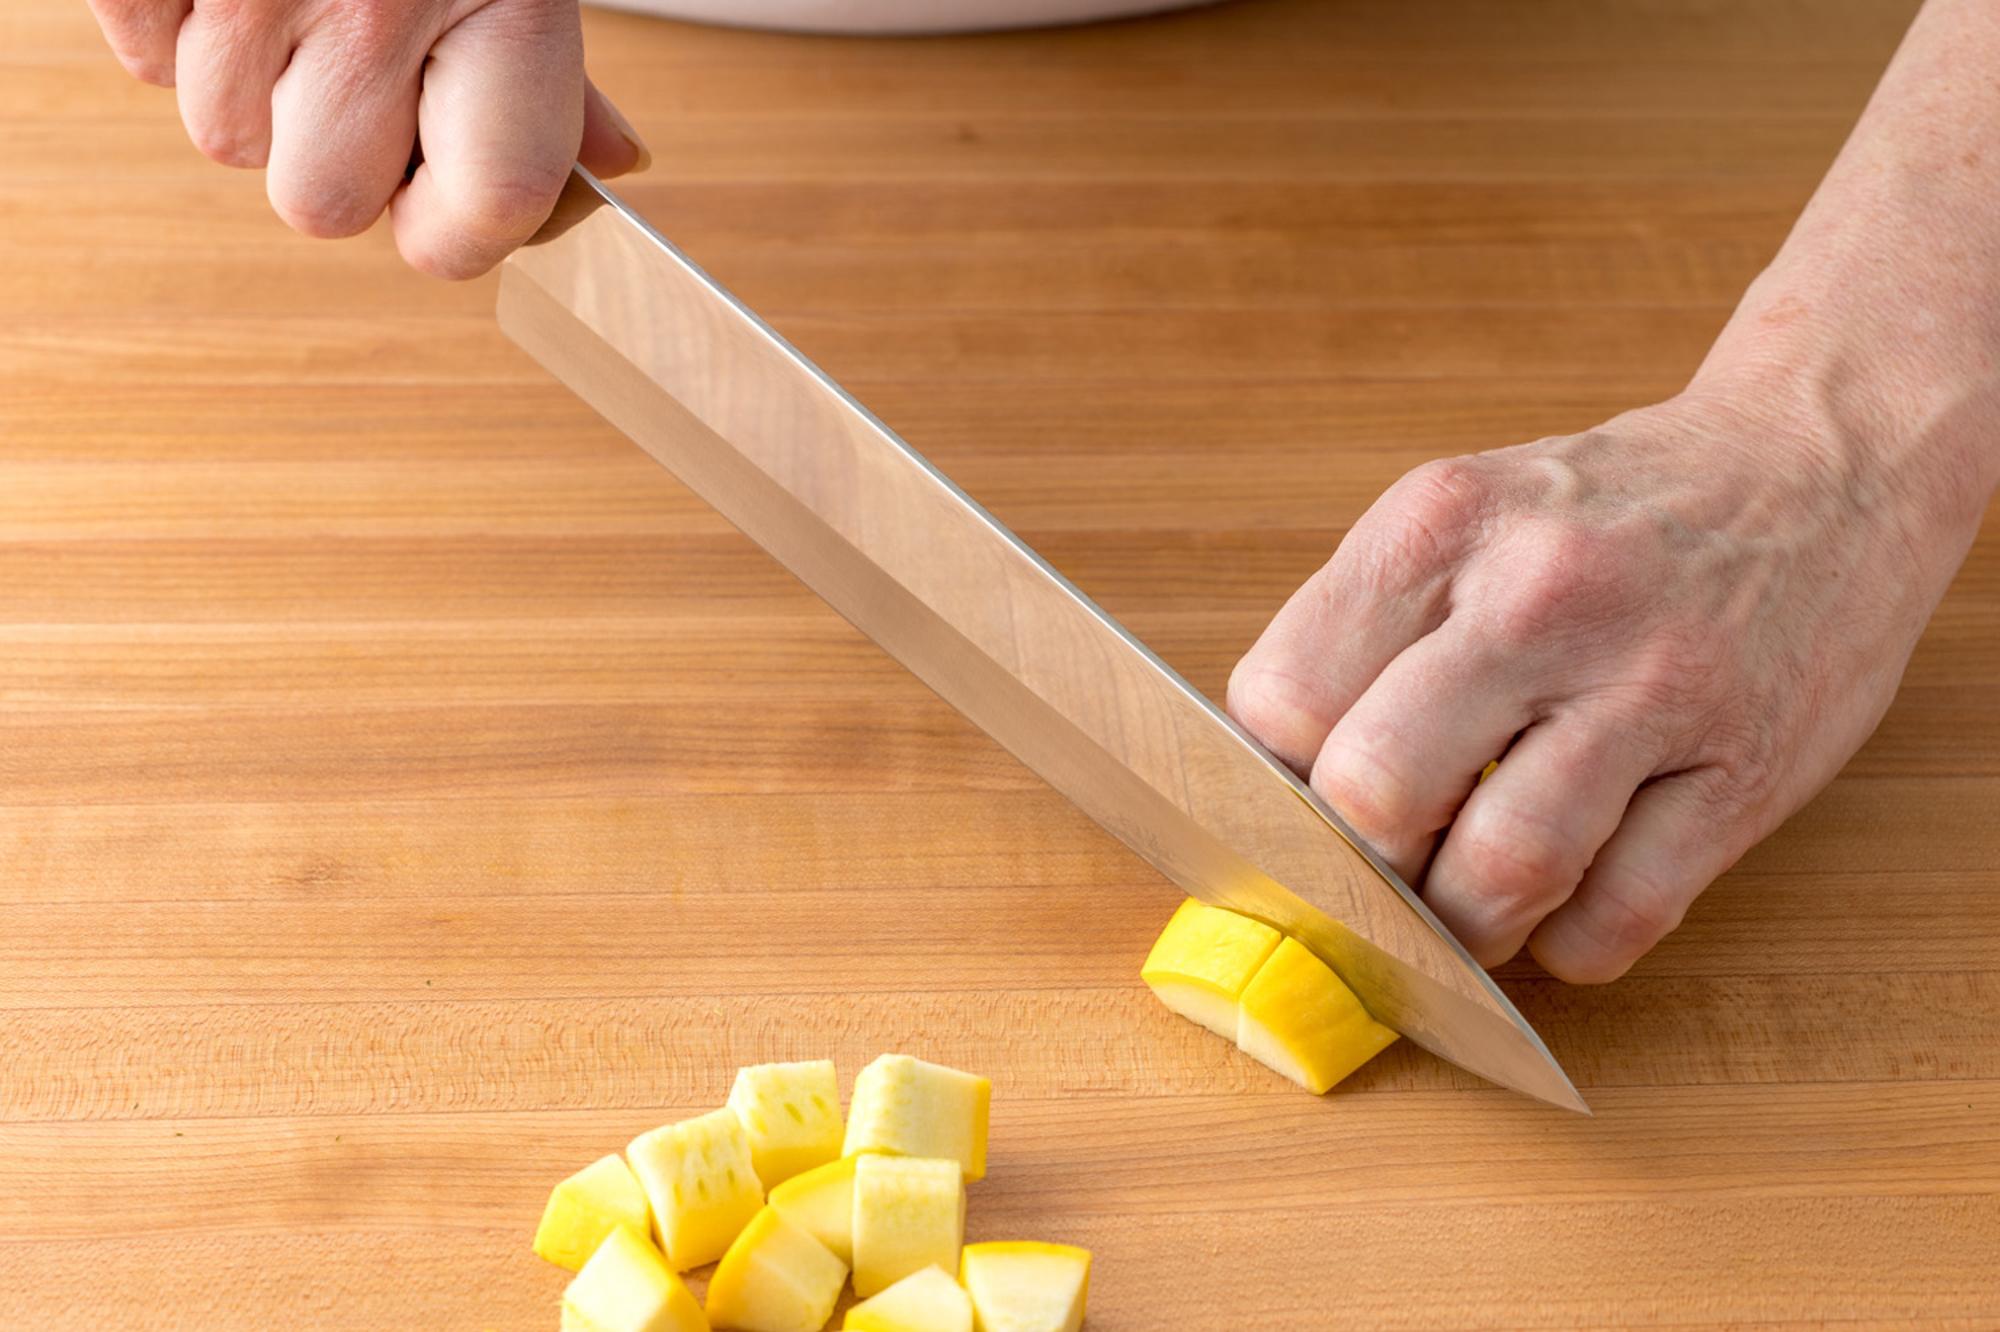 How to Dice Yellow Squash